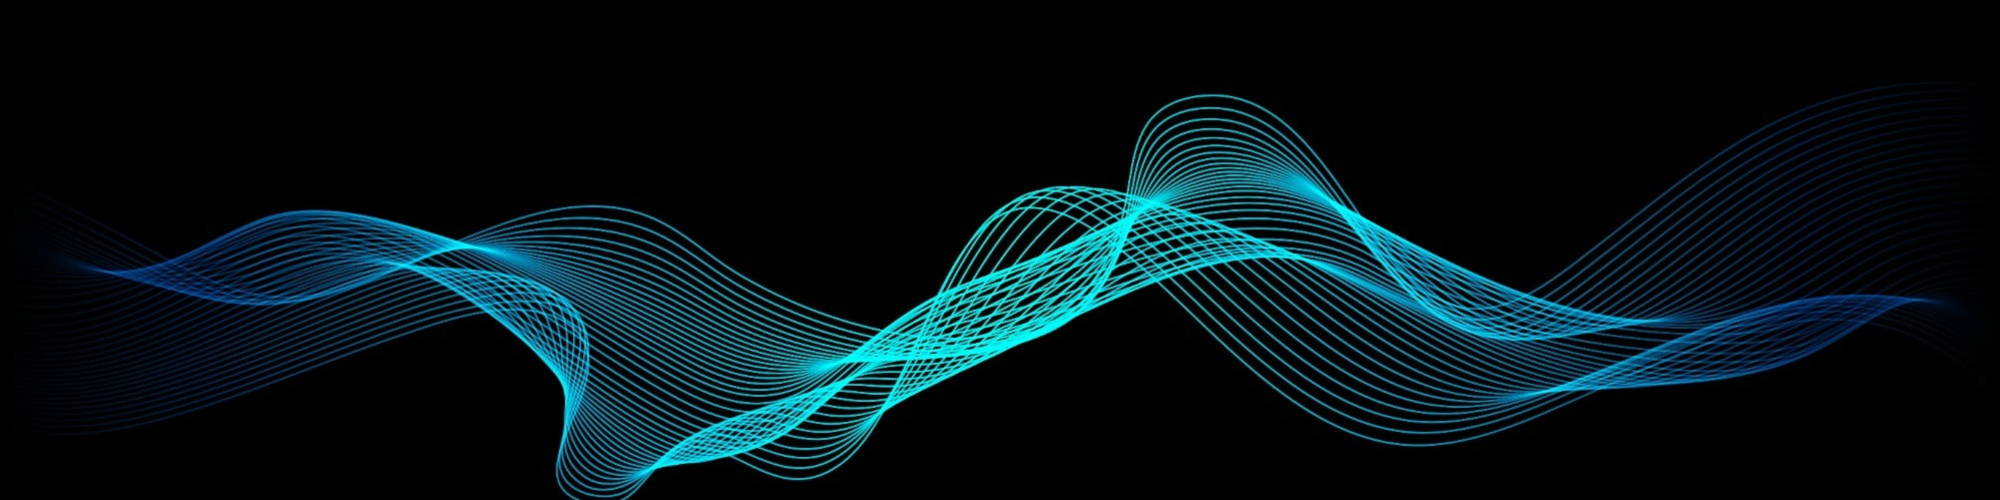 Abstract wavy blue lines